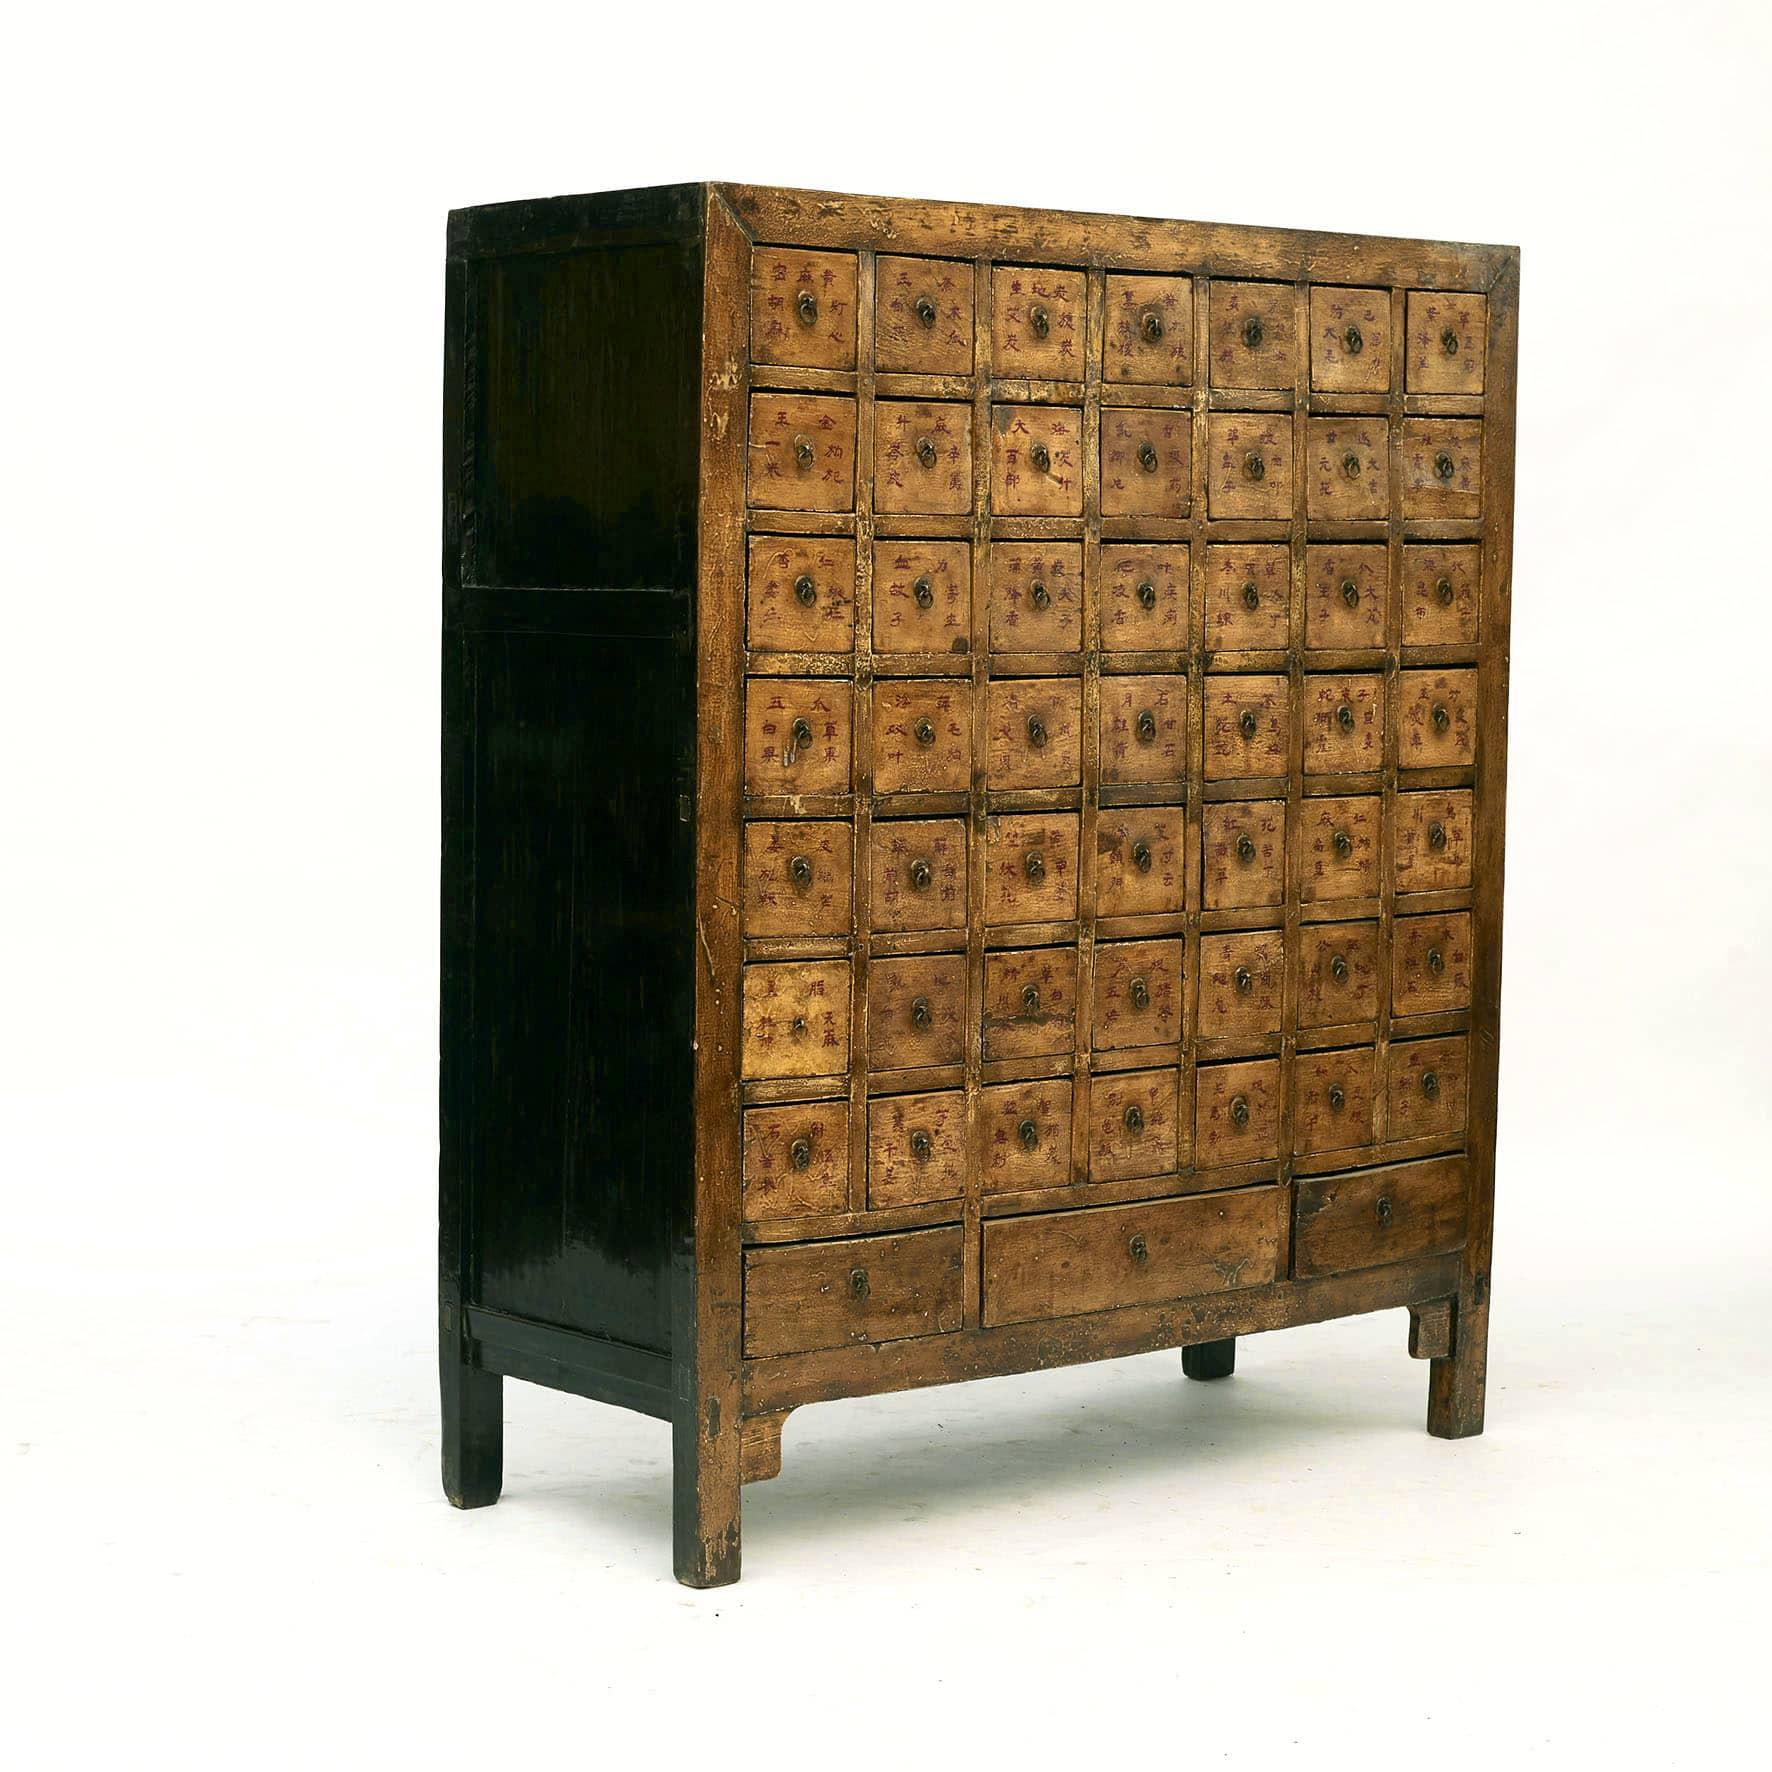 Chinese apothecary / pharmacy medicine chest with 52 drawers. These were used to store and organise Chinese herbs and the drawers were labeled according to the herbs that were stored inside.
Original mustard-yellow colored lacquer, top and sides